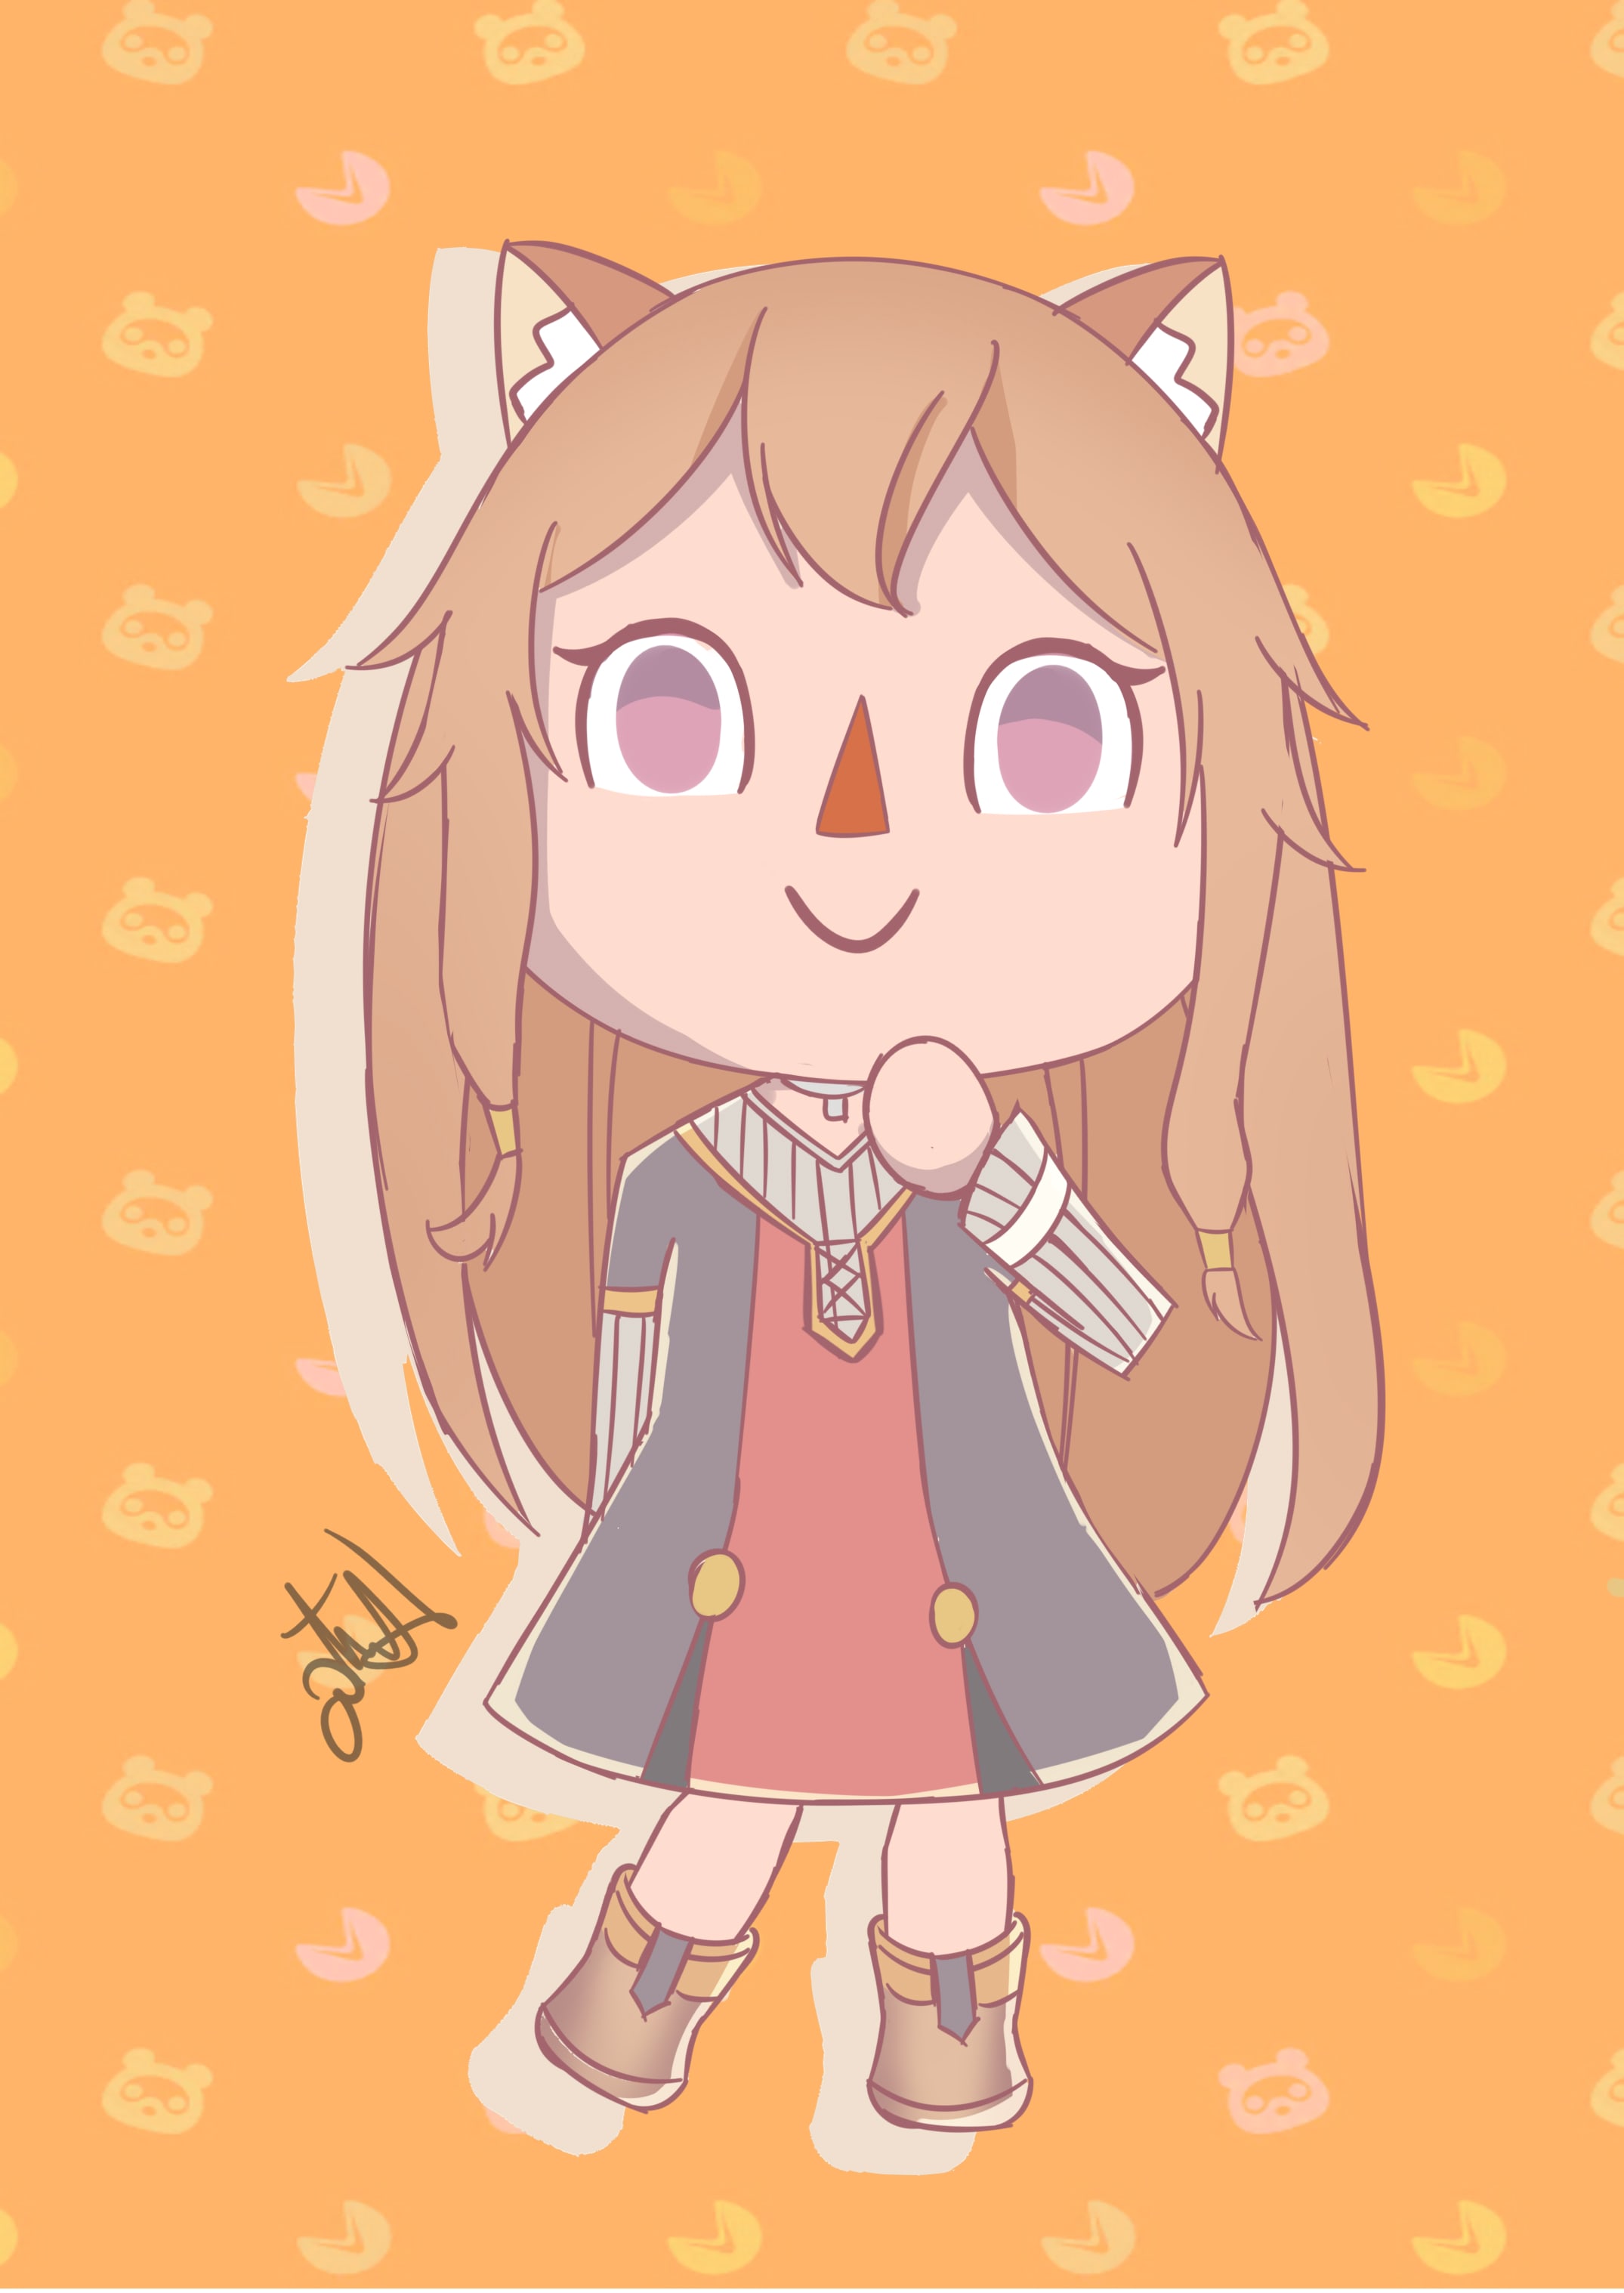 Draw Anime Character As Animal Crossing Style By Stefan95 Art